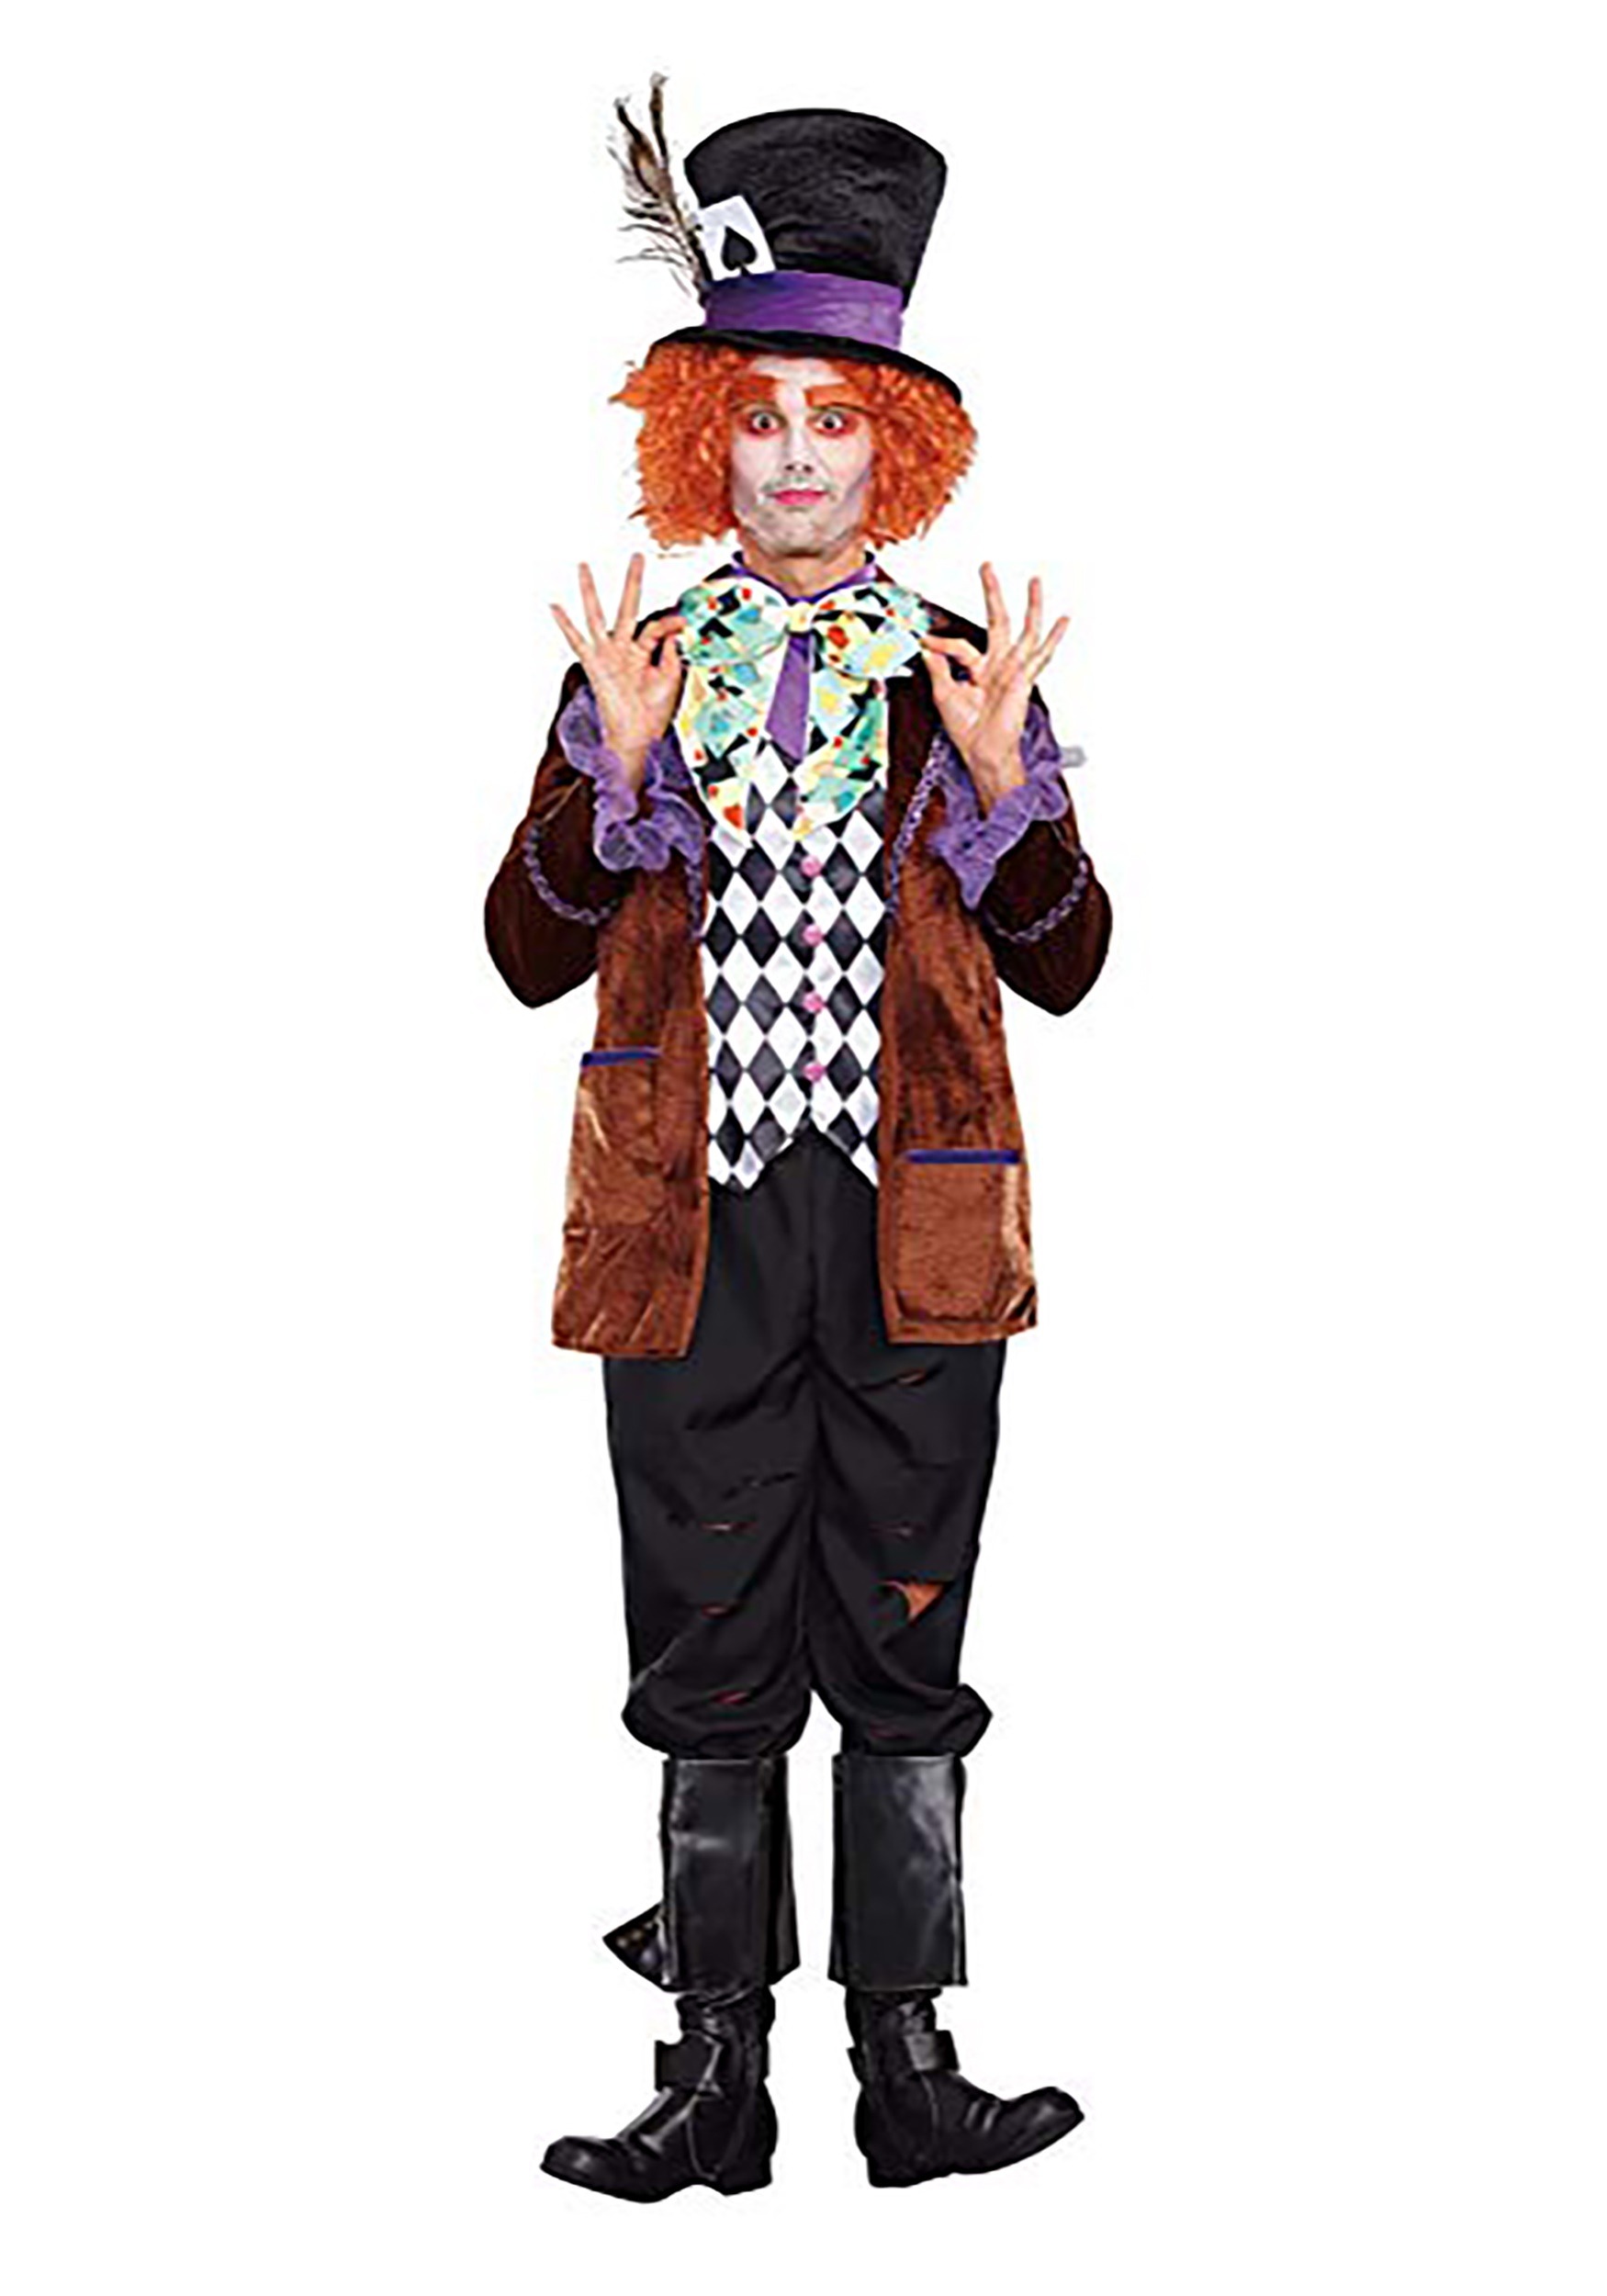 Image of Hatter Madness Costume for Men ID DR10297-2X